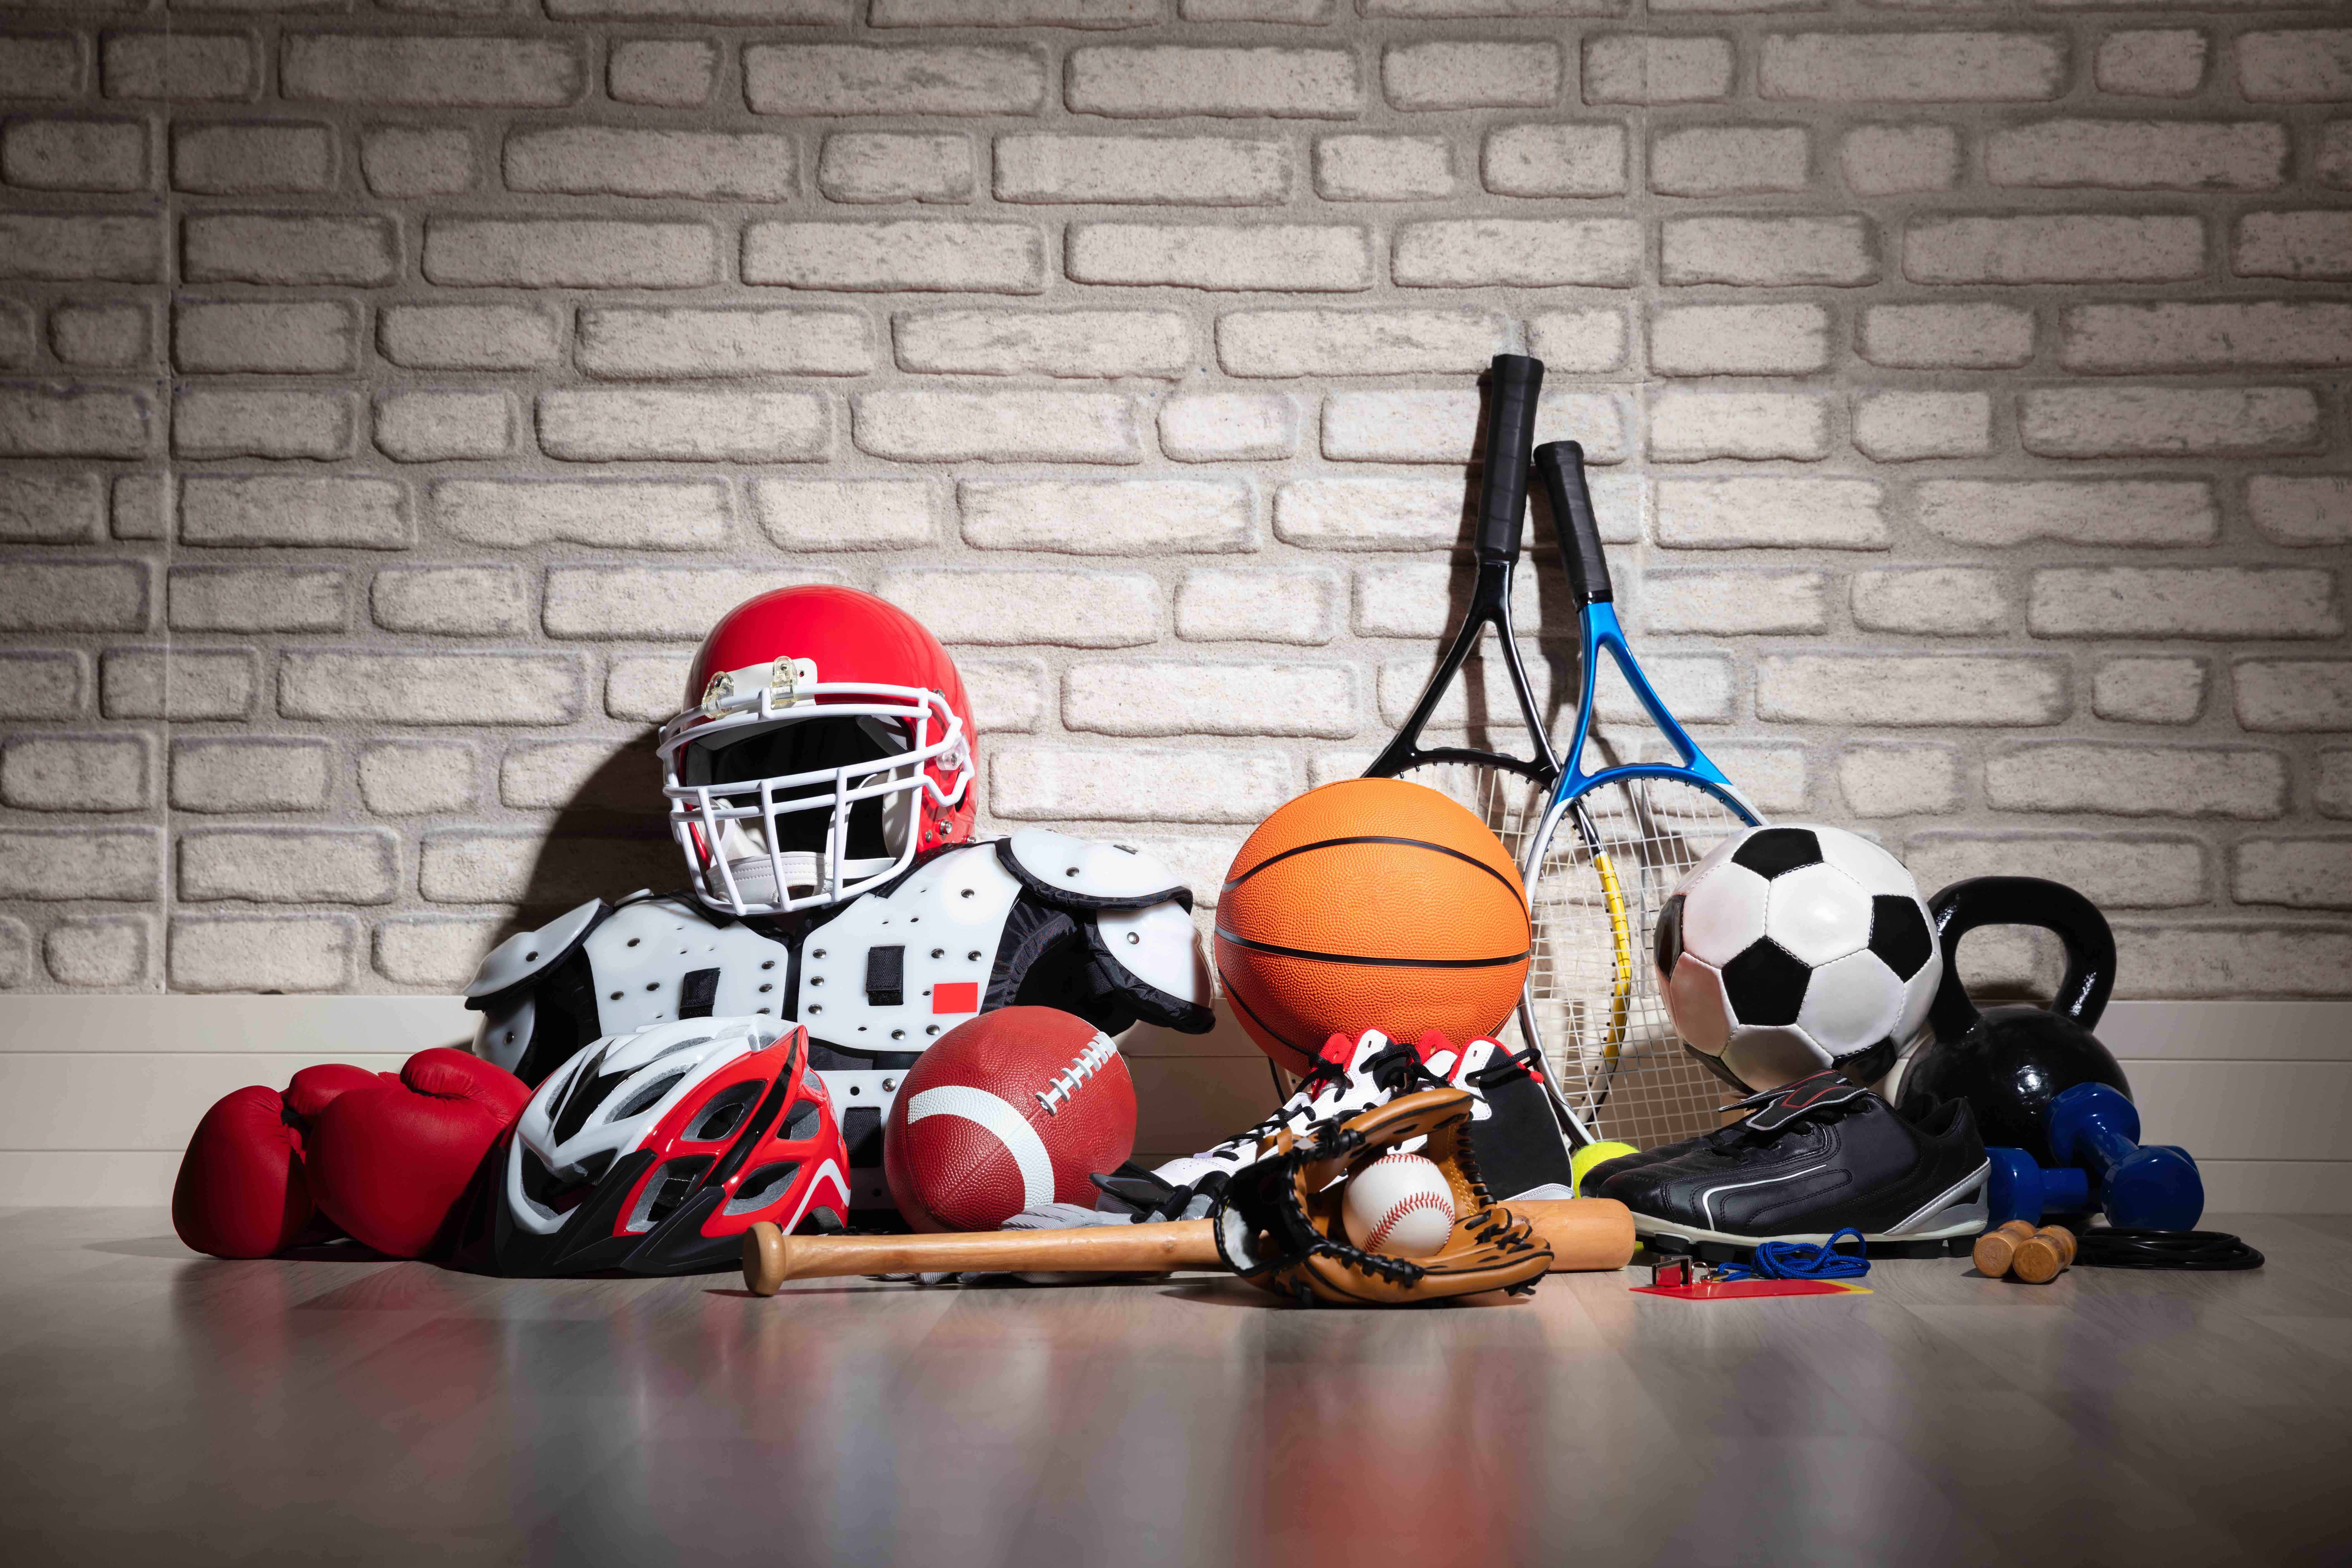 9 Fun Facts About Sporting Equipment - Food & Supply Source